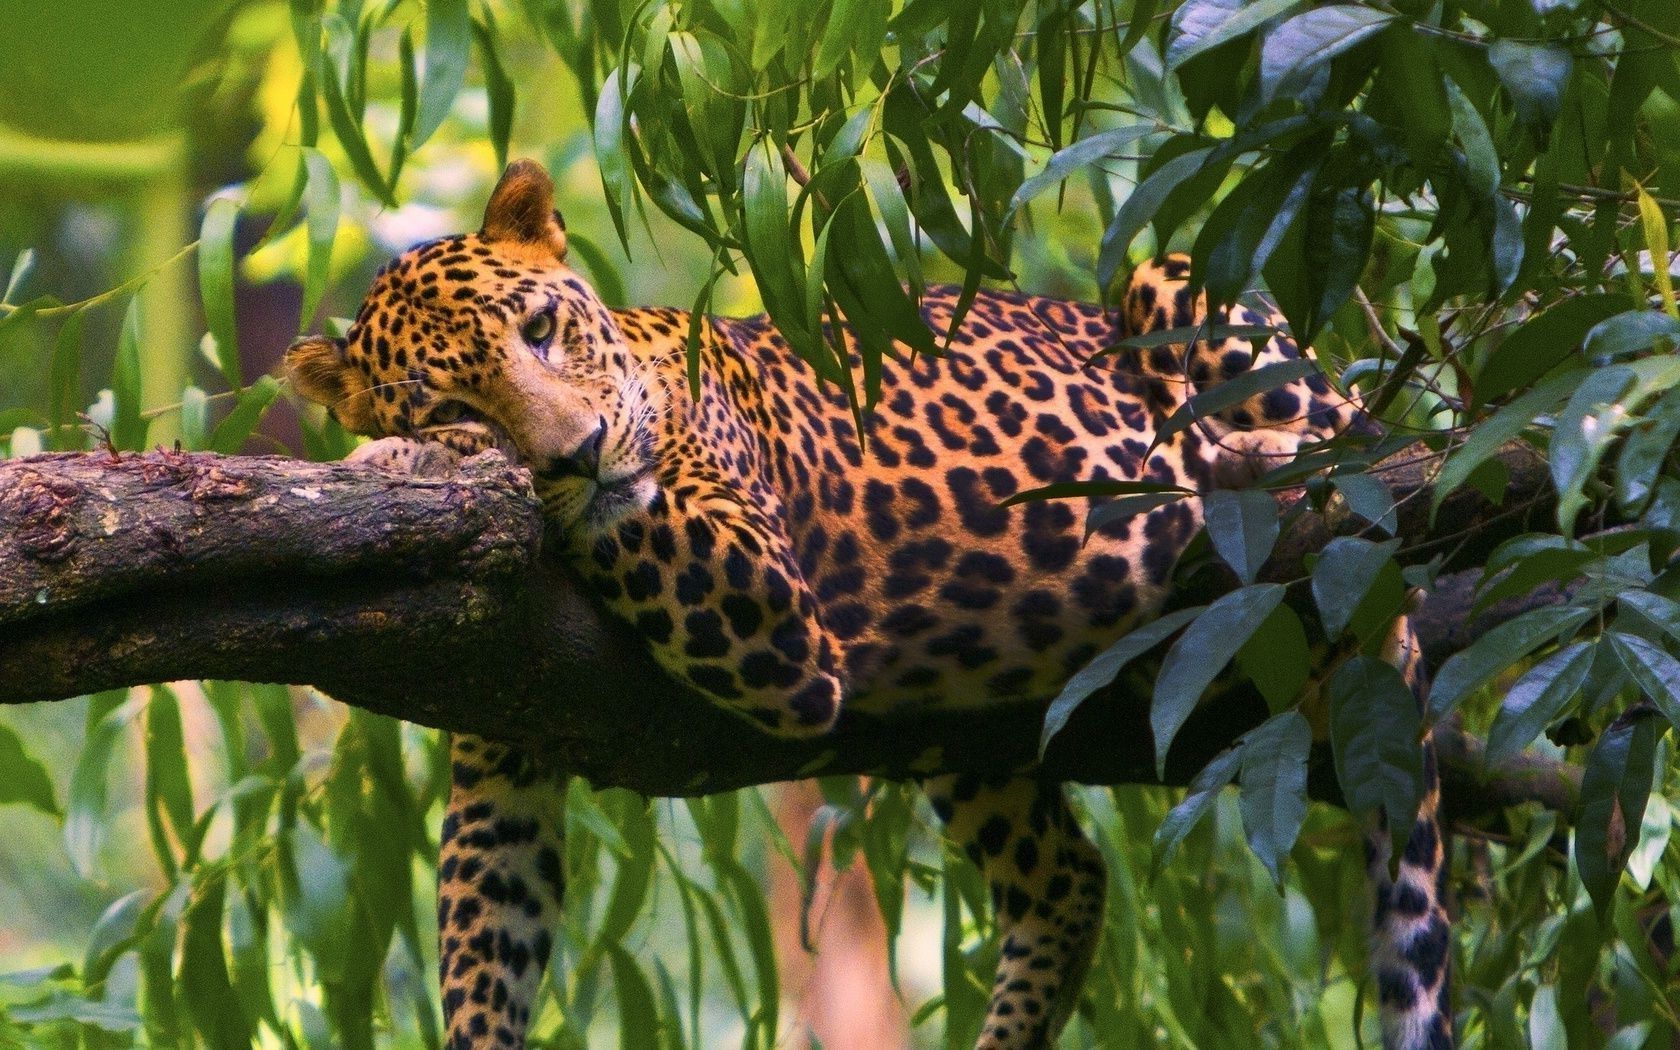 The rest of the predator leaves the tree leopard